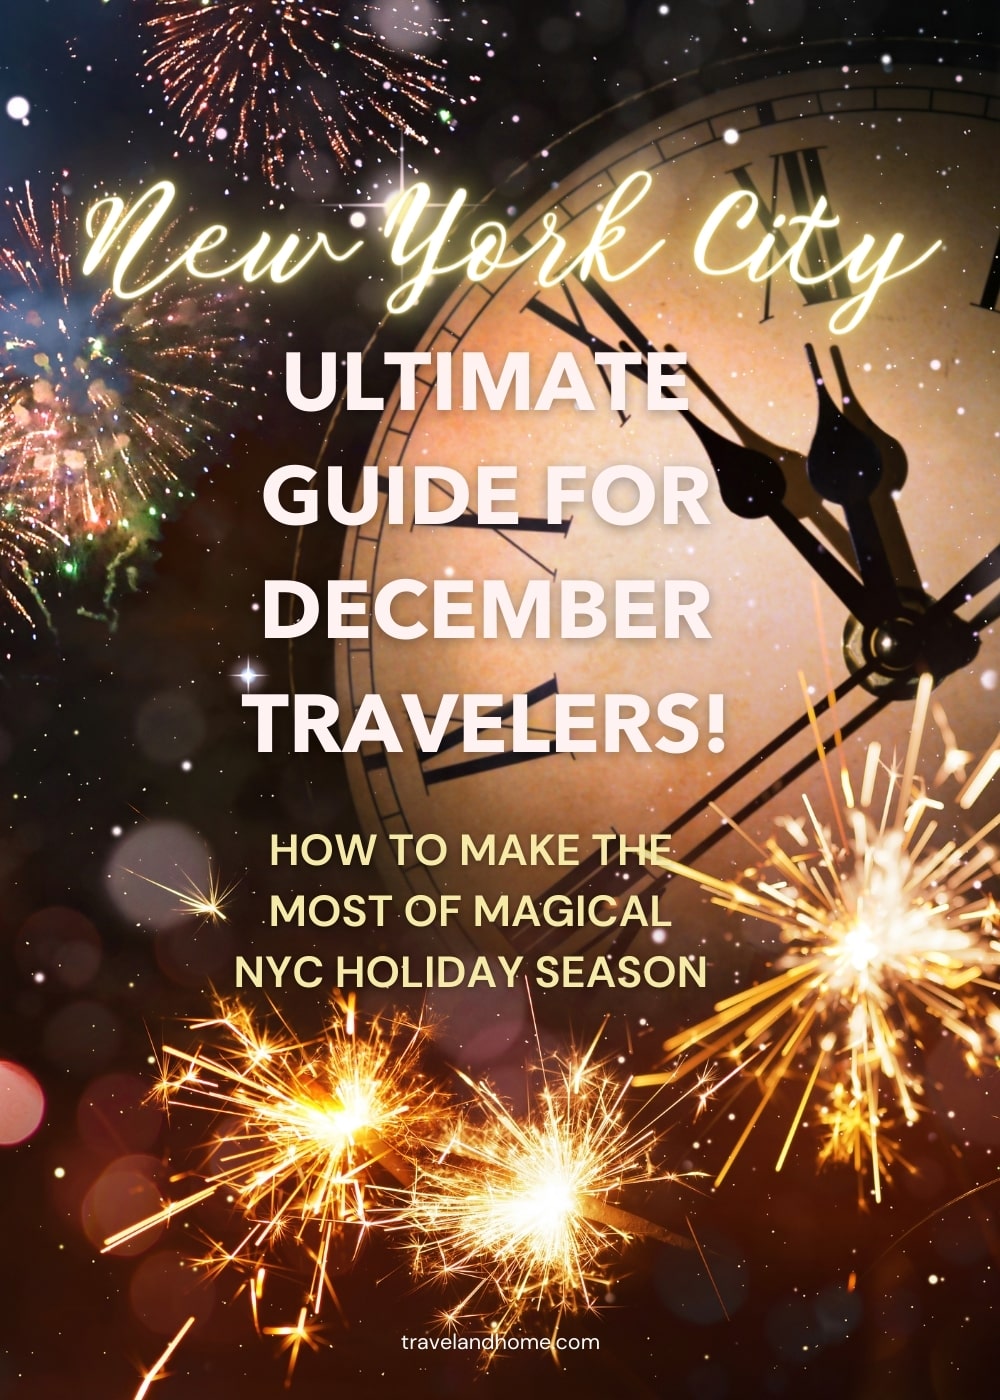 How to Make the Most of Magical NYC Holiday Season, Ultimate Guide for December Travelers, New York City, New Year's Eve min